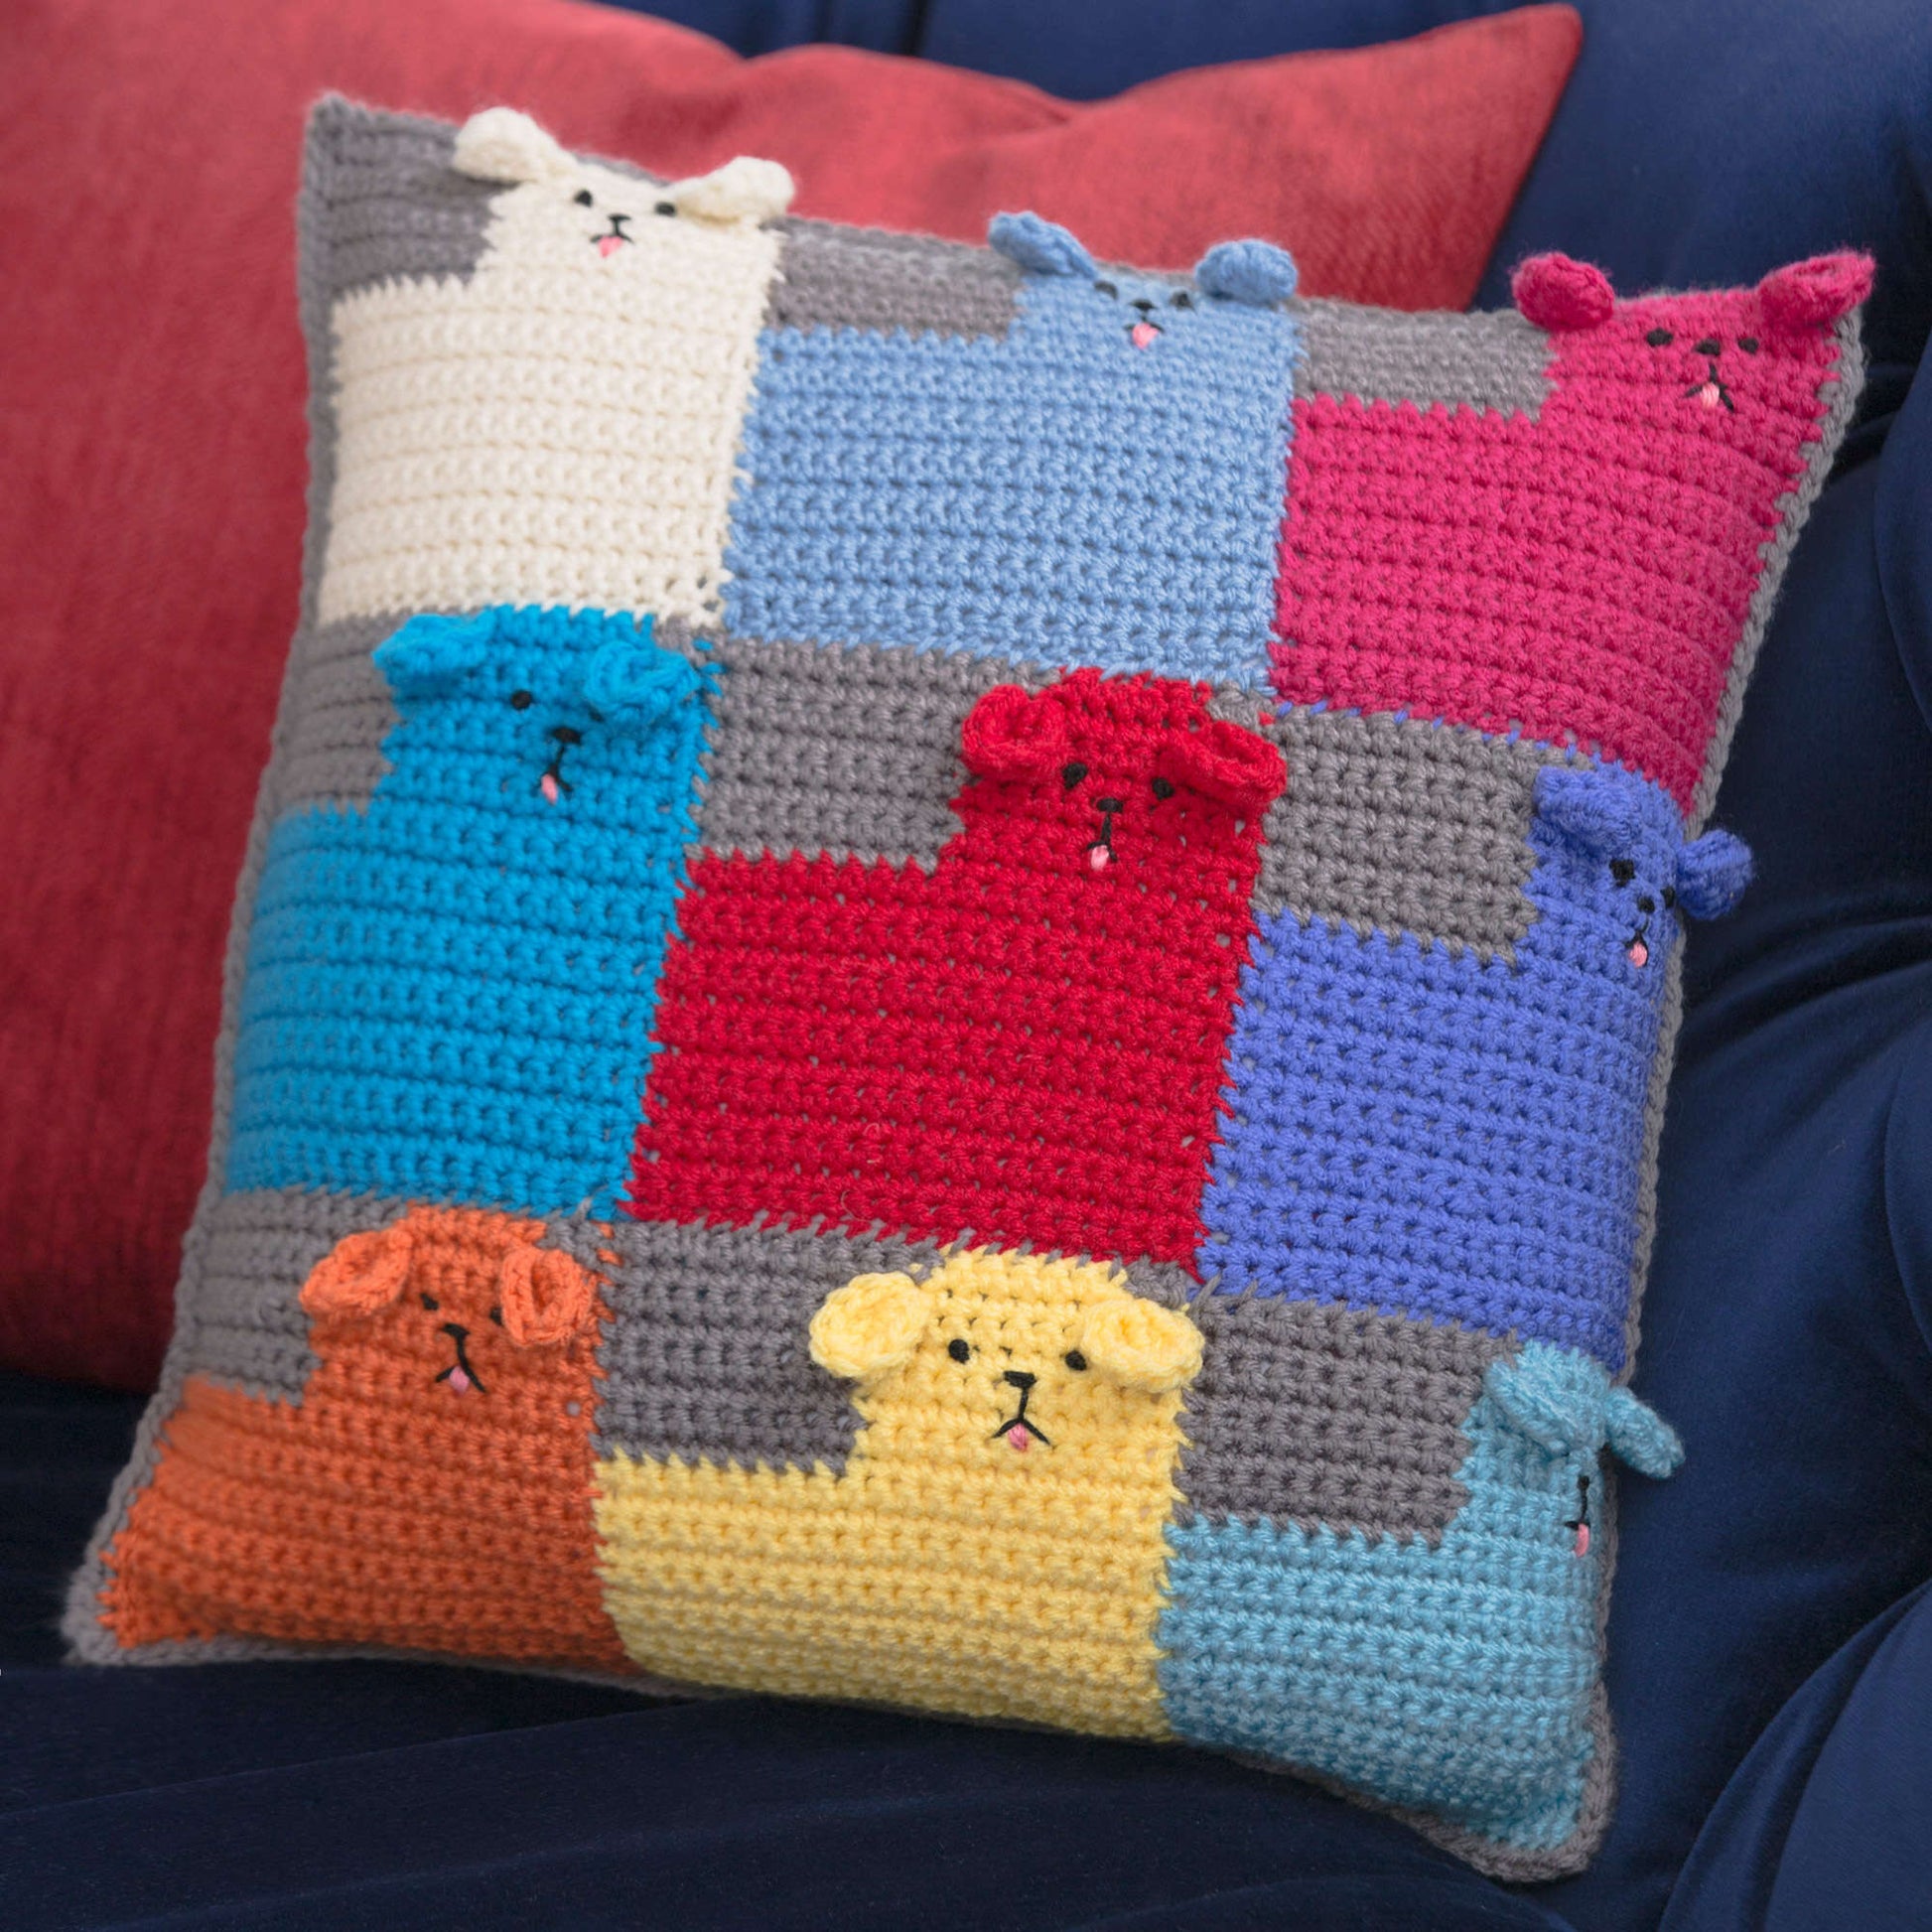 Free Red Heart Crochet Kittens And Puppies For Sale Pillows Pattern